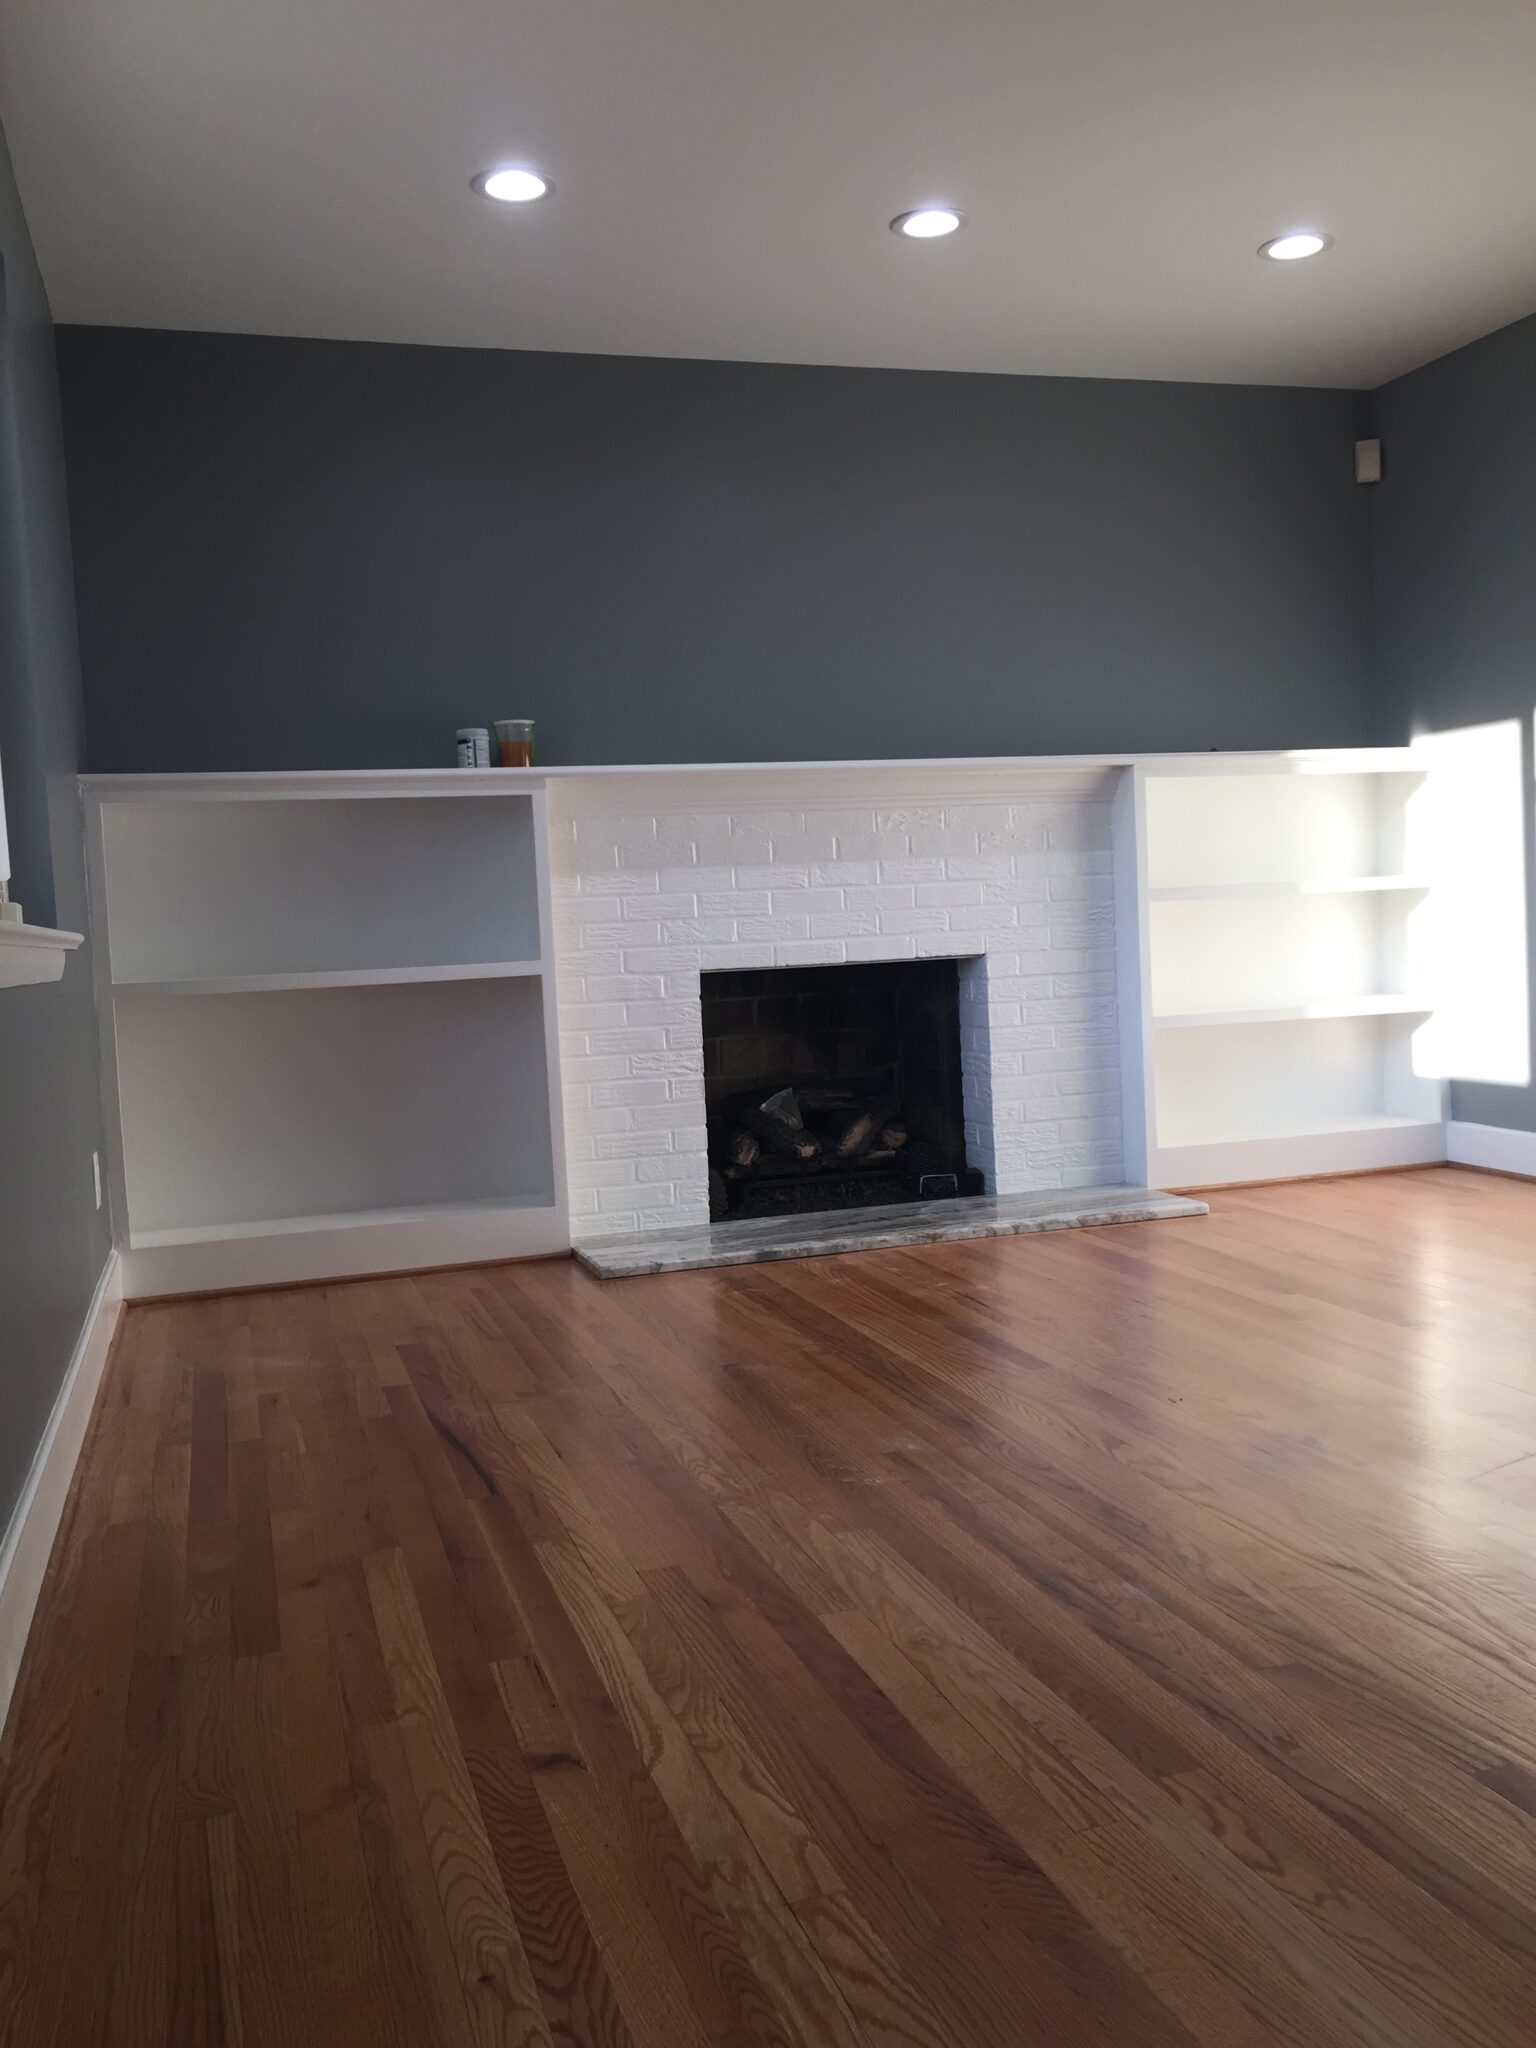 Shelving, hardwood floor, chimney hearth and Painting